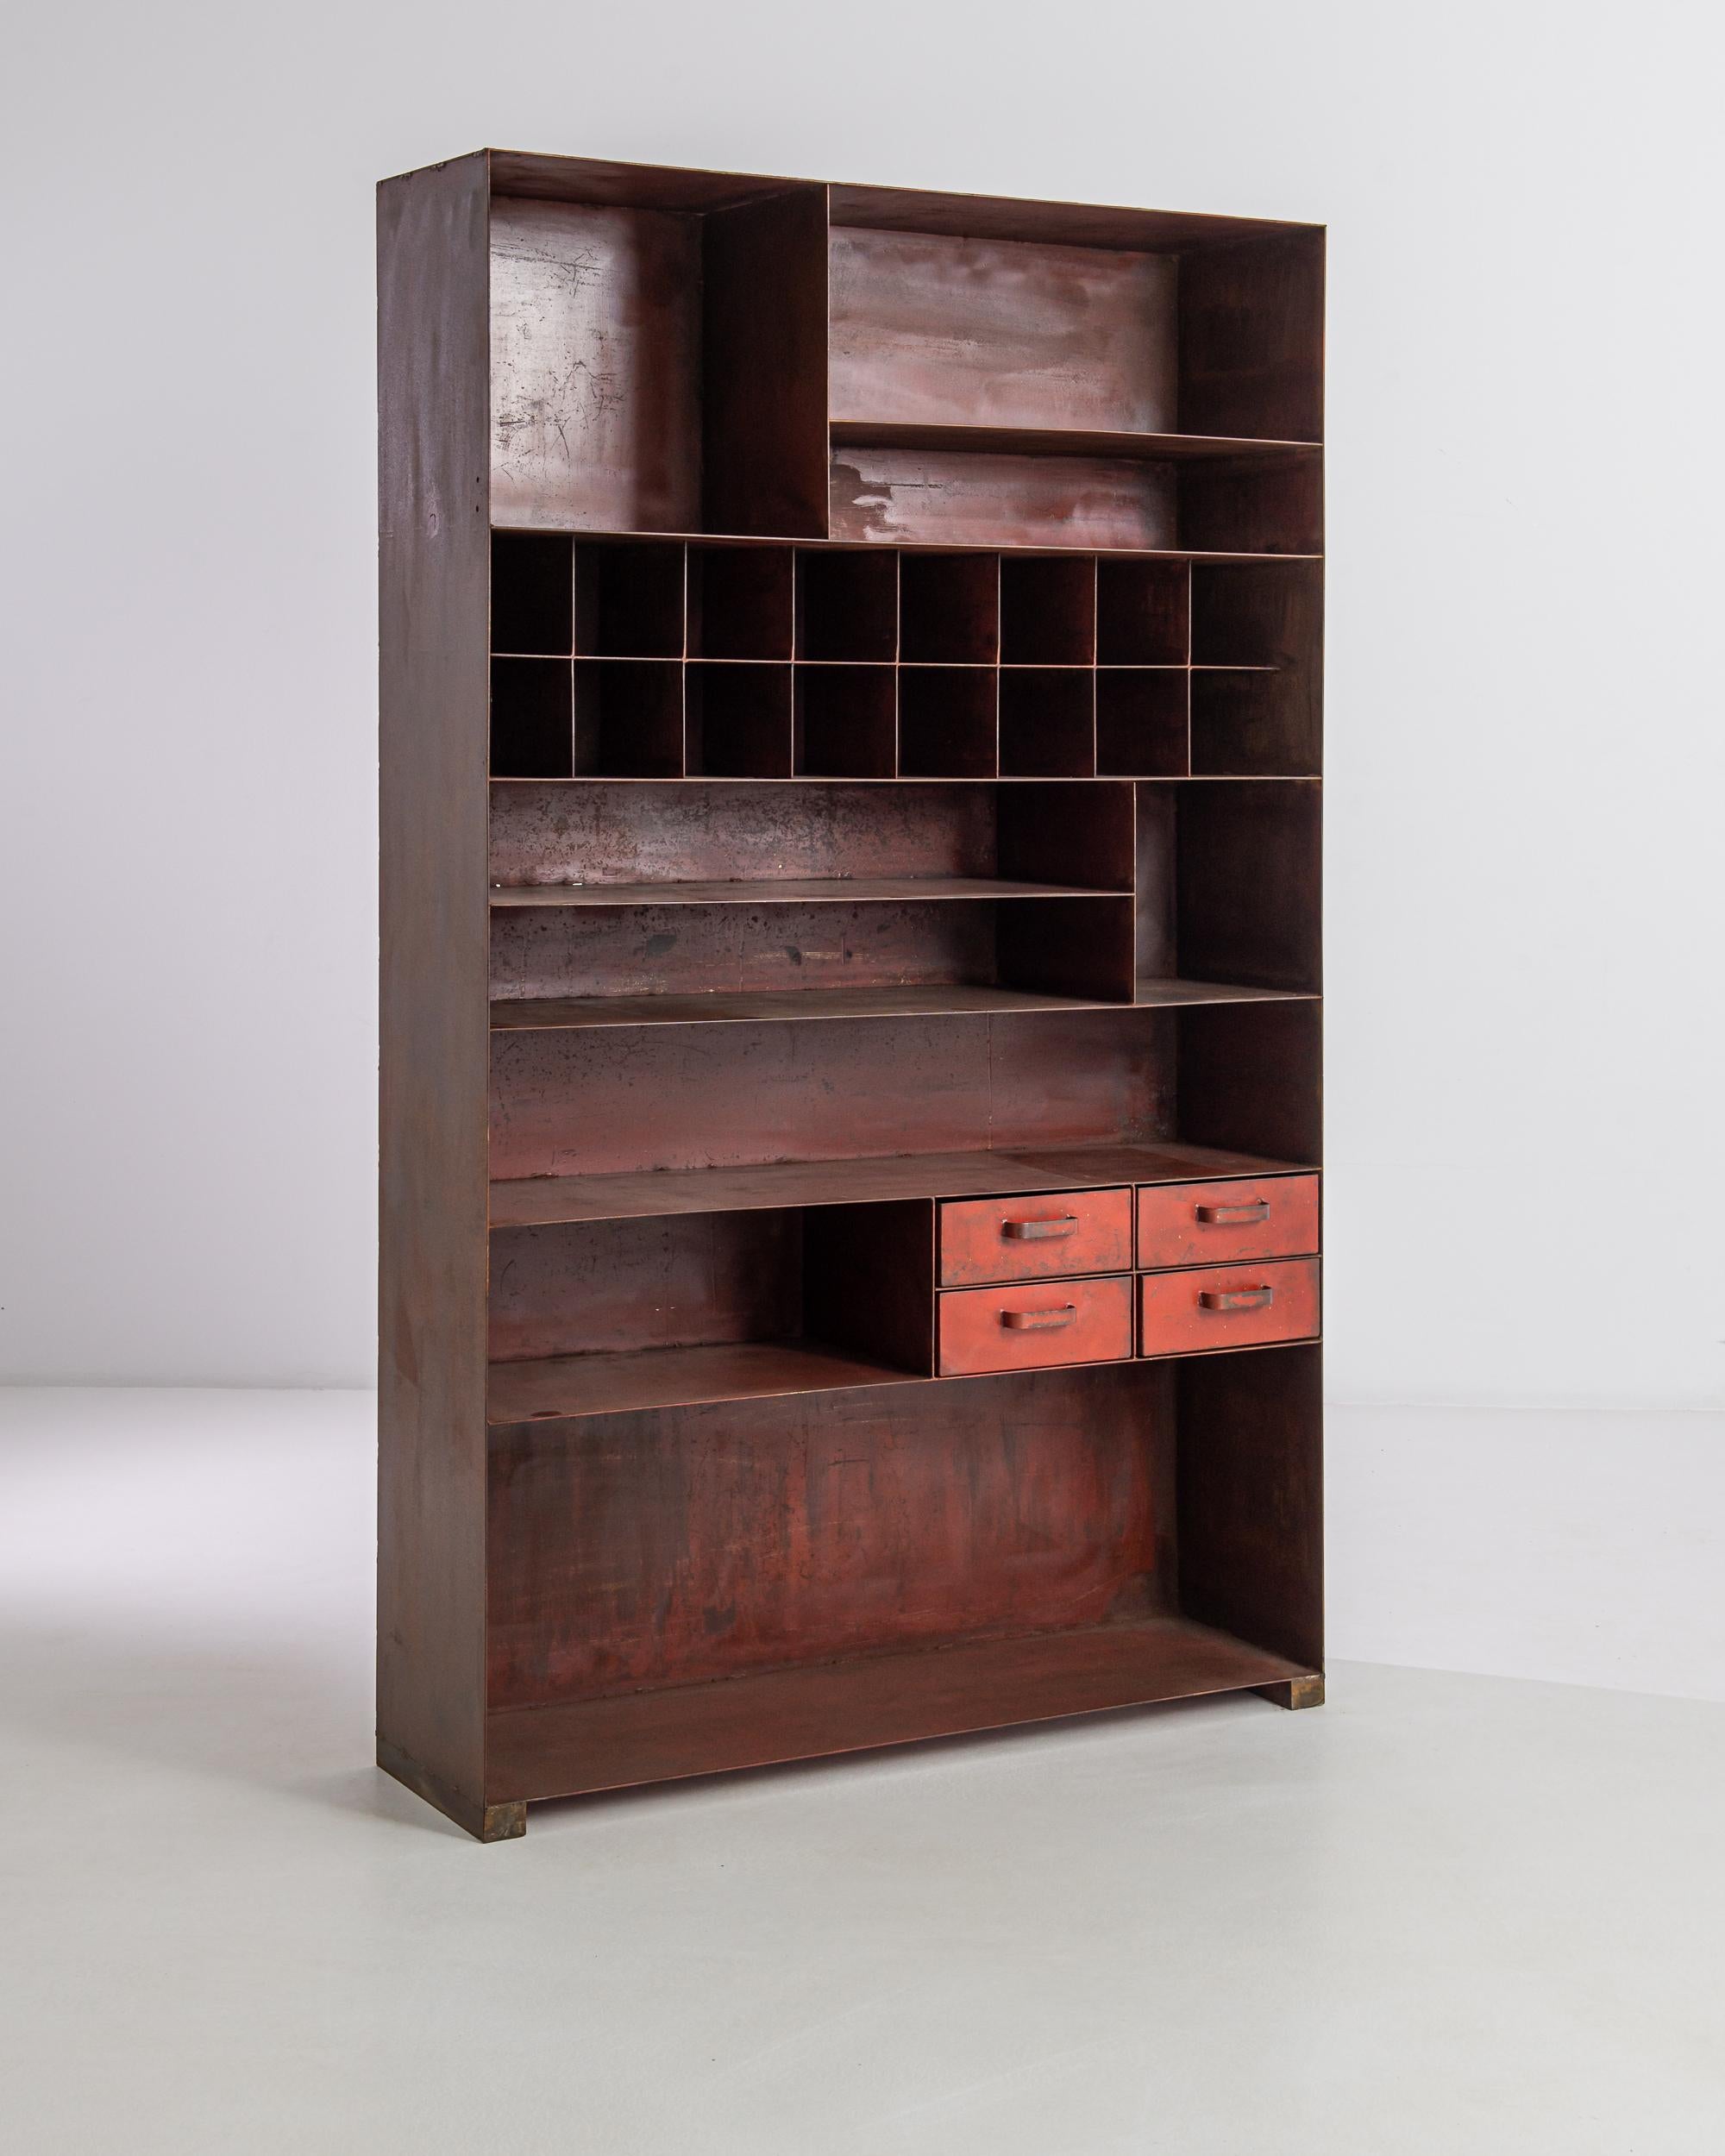 This intriguing vintage metal cabinet offers a rich interpretation of the industrial aesthetic. Sourced from France, a host of different sized compartments creates a lively sense of variation and asymmetric order, inviting an array of organizational